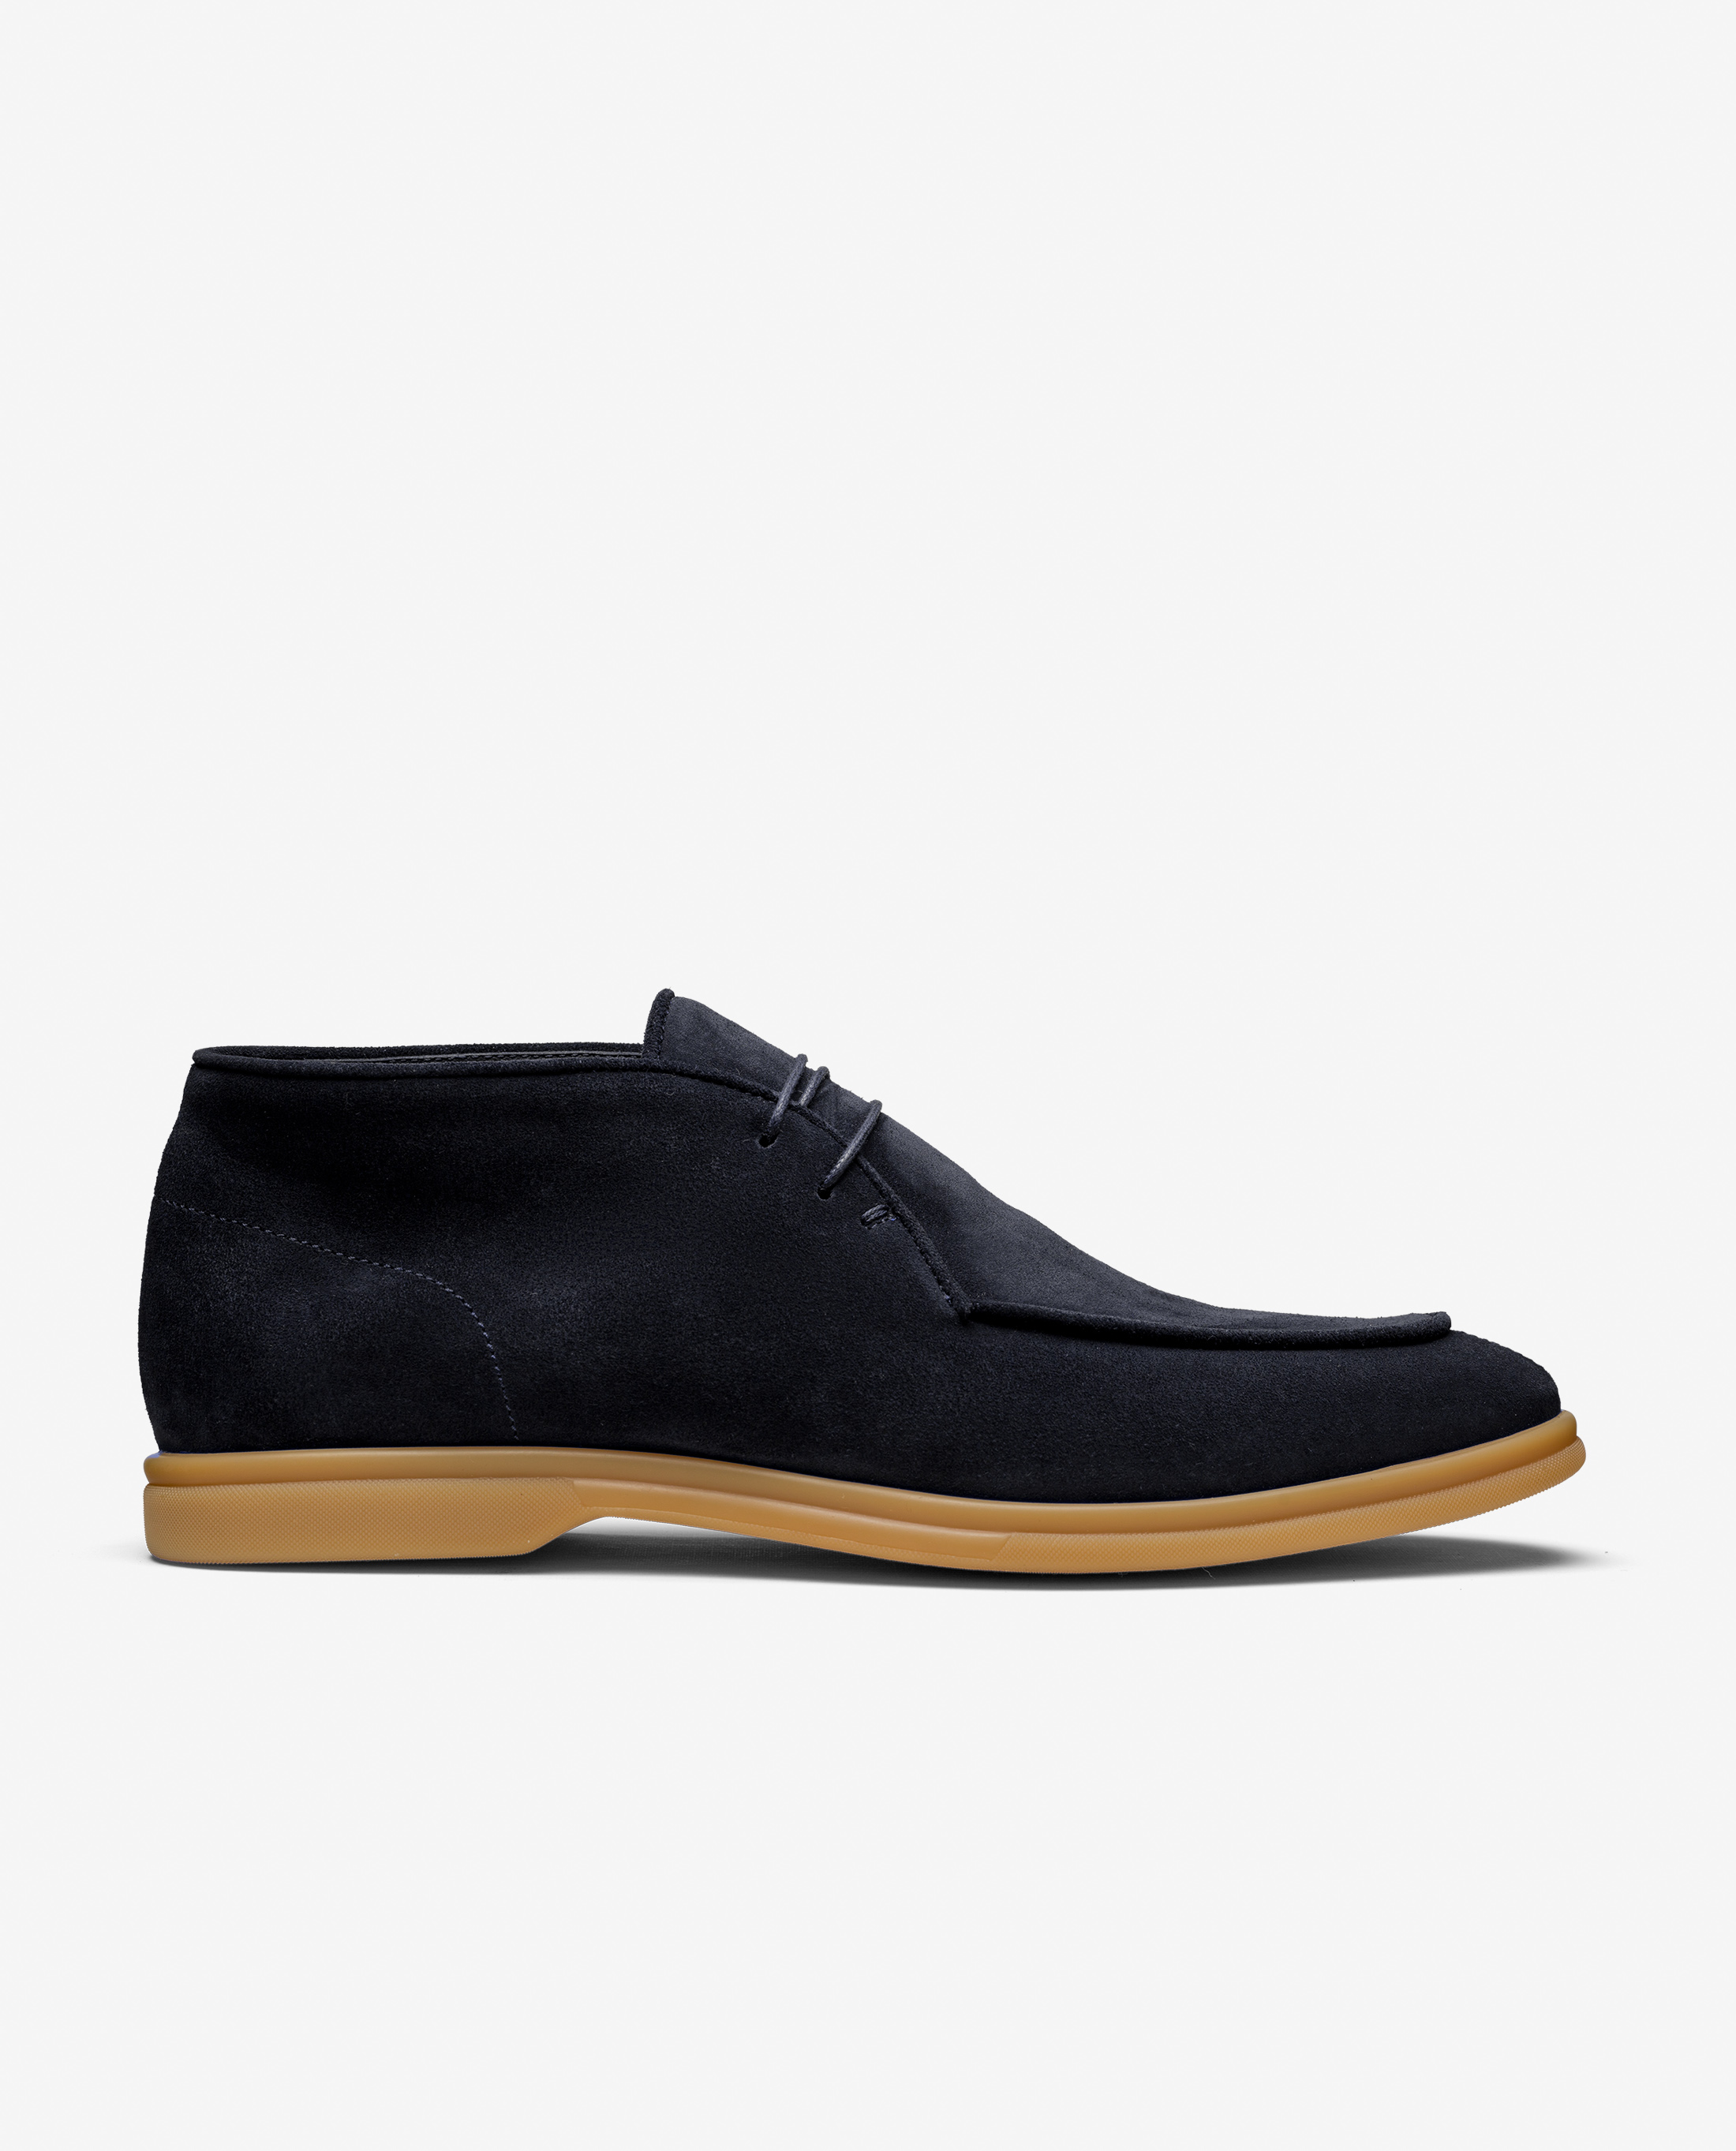 Midnight-Blue-Suede-Mid-Top-City-Loafer-Mid-top_city_loafer_LIS10-0232fc9541244587bf3b1c718d95a4e8